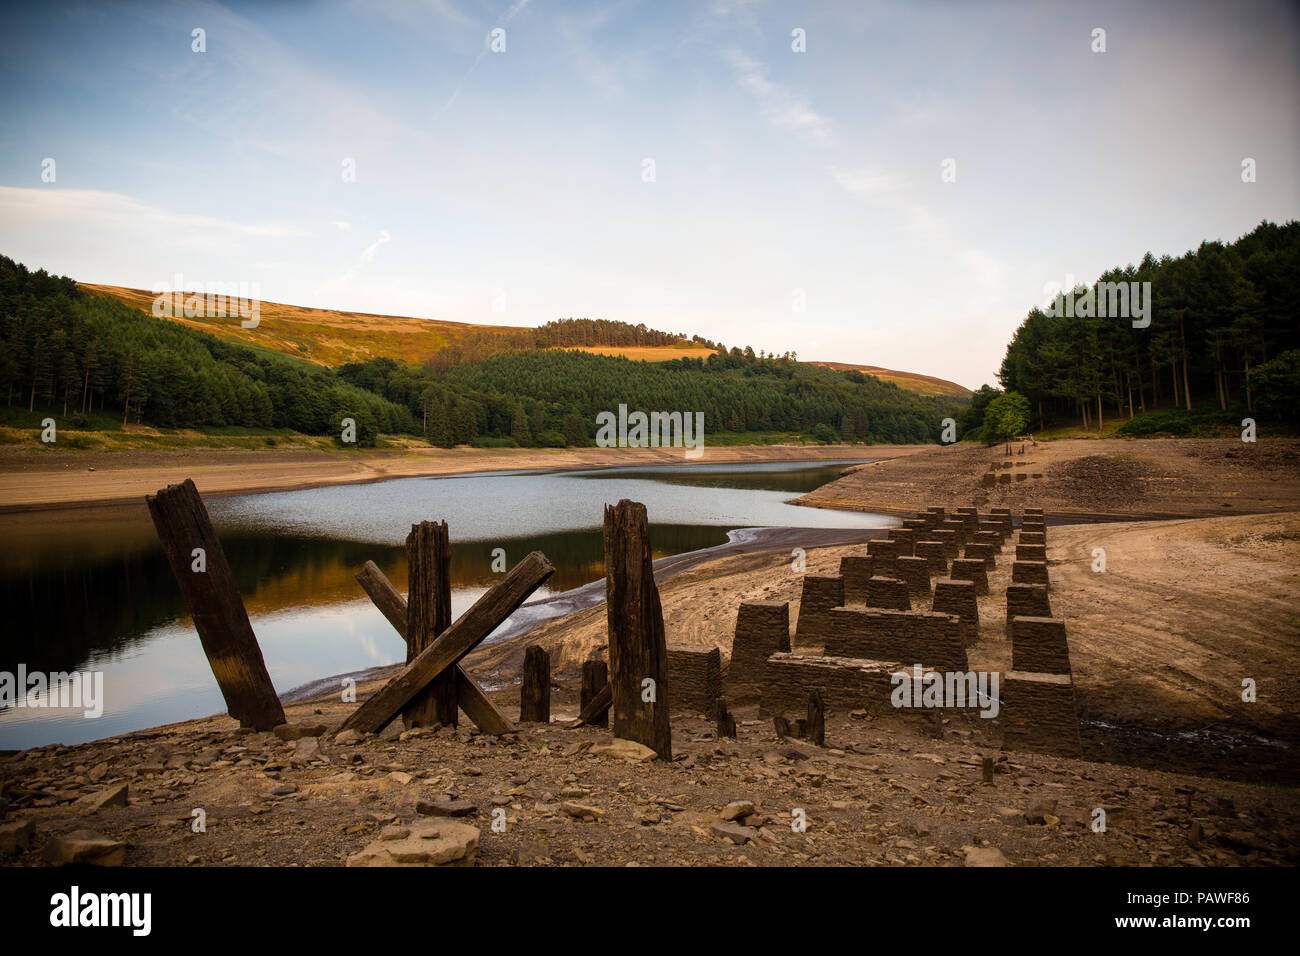 Derwent Valley, UK, 25 July 2018. 25th July 2018. Heatwave in the UK continues as water levels in the upper Derwent Valley reservoirs continue to go lower. ©Gary Bagshawe/Alamy Live News. Stock Photo